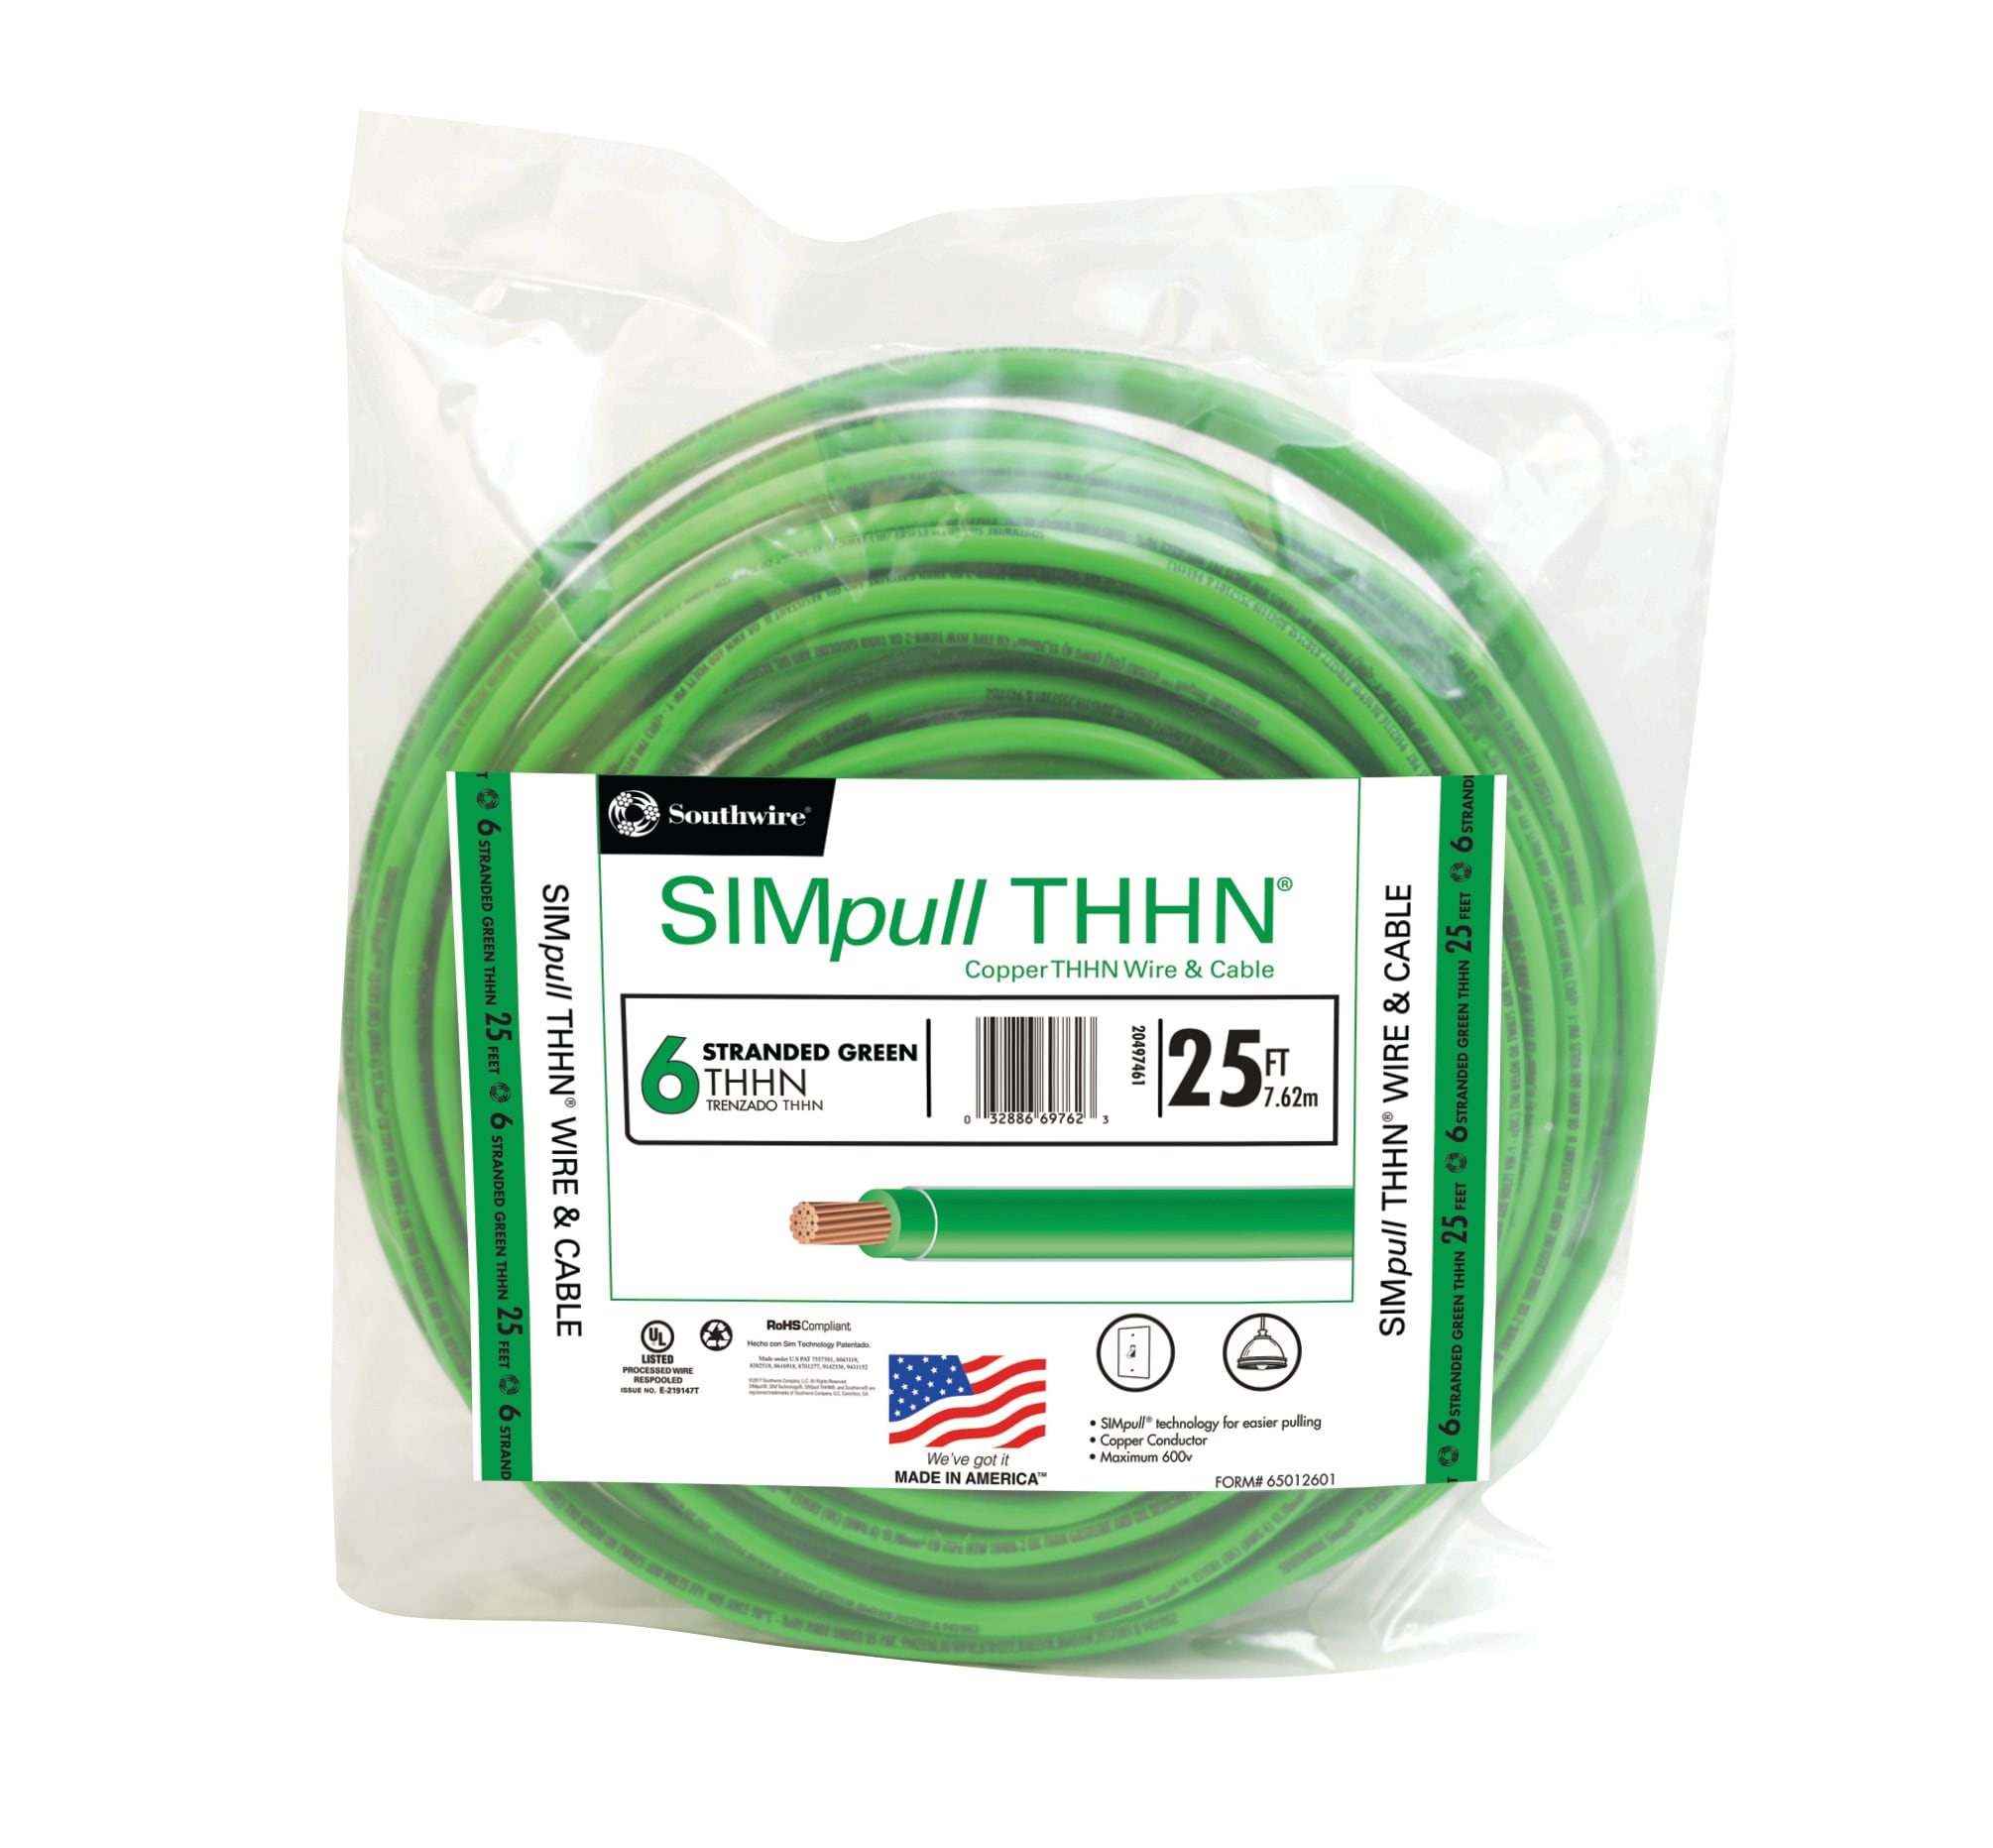 6 AWG Stranded THHN Green Wire - 500 Feet - 600 Volt